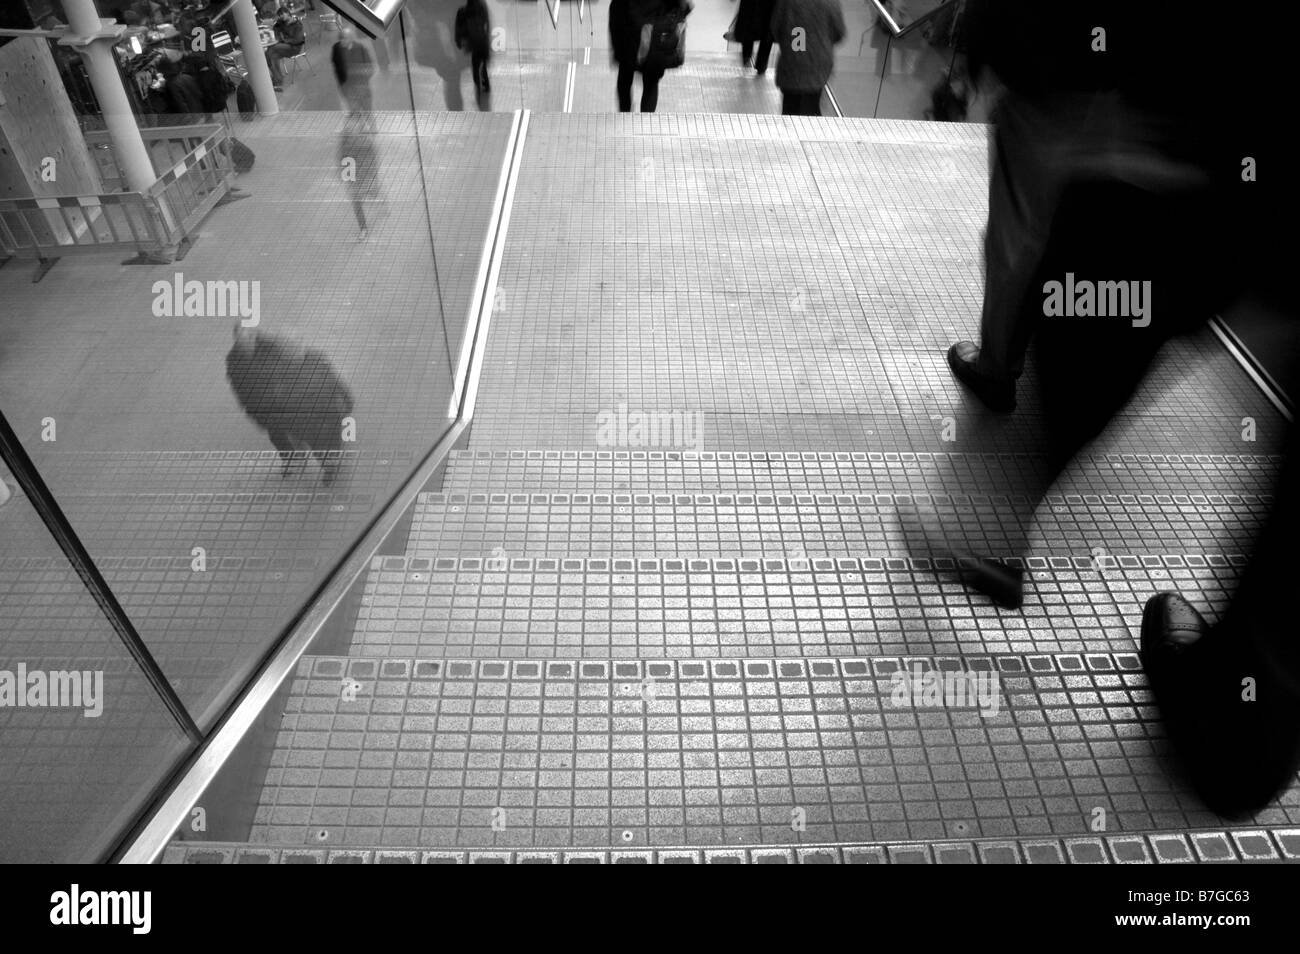 Black and white image of a man's legs and feet walking down stairs in blurred motion with people walking on pavement below. Stock Photo